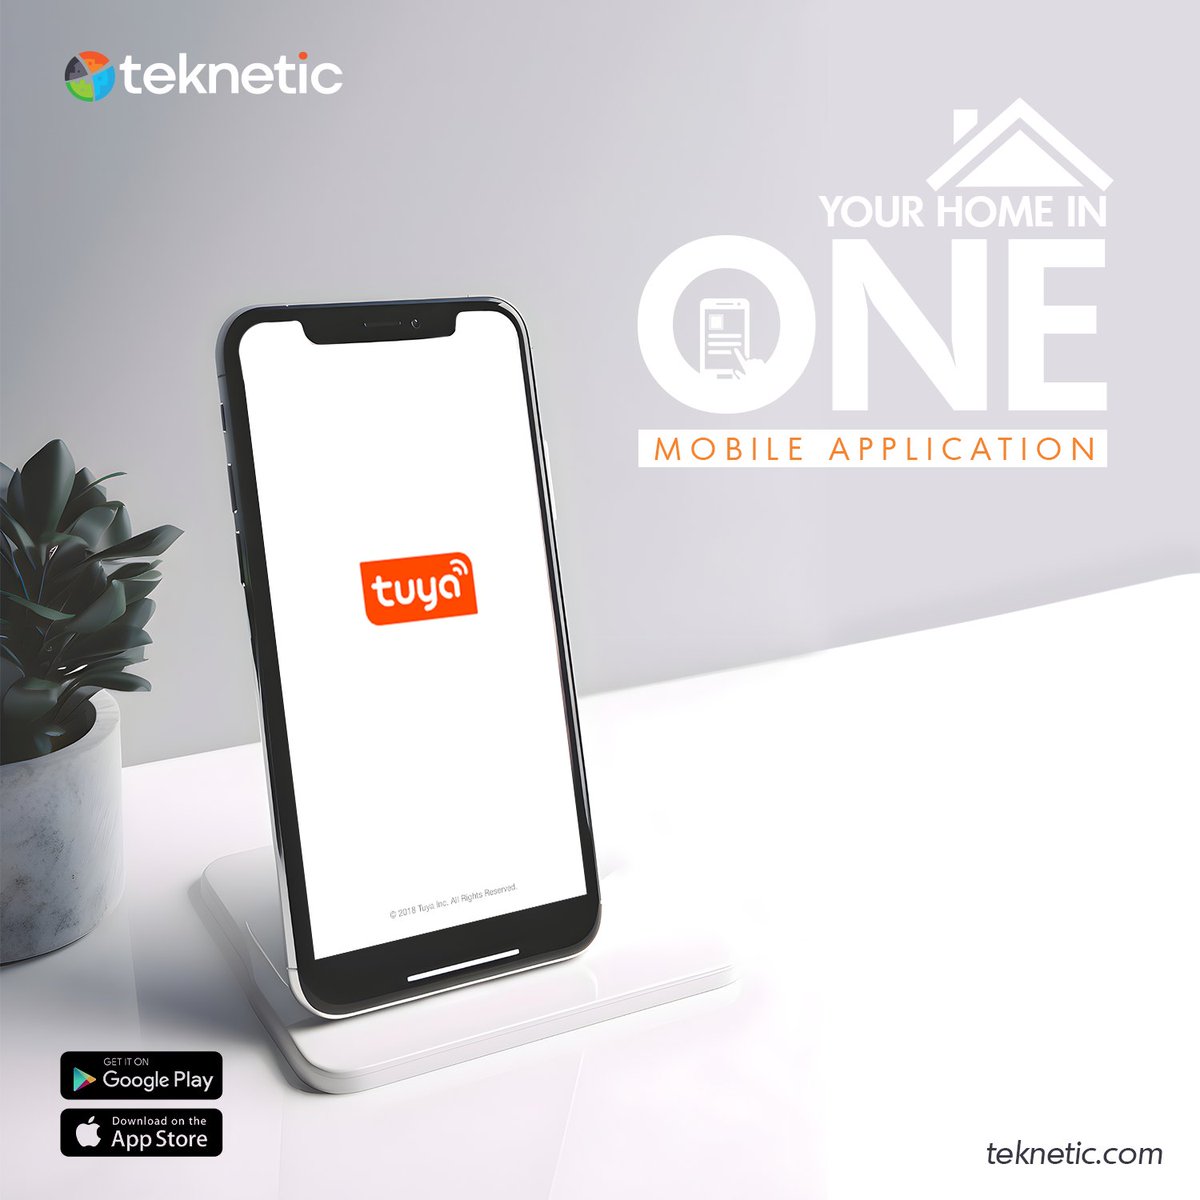 Smart home, easy control. One app does it all!😉

teknetic.com

#teknetic #thefutureyoudeserve #Tuya #tuyaapp #smartcontrol #homeautomation #smartphone #smarthome #control #phoneaccess #foryoupage #mobileapplication #homesweethome